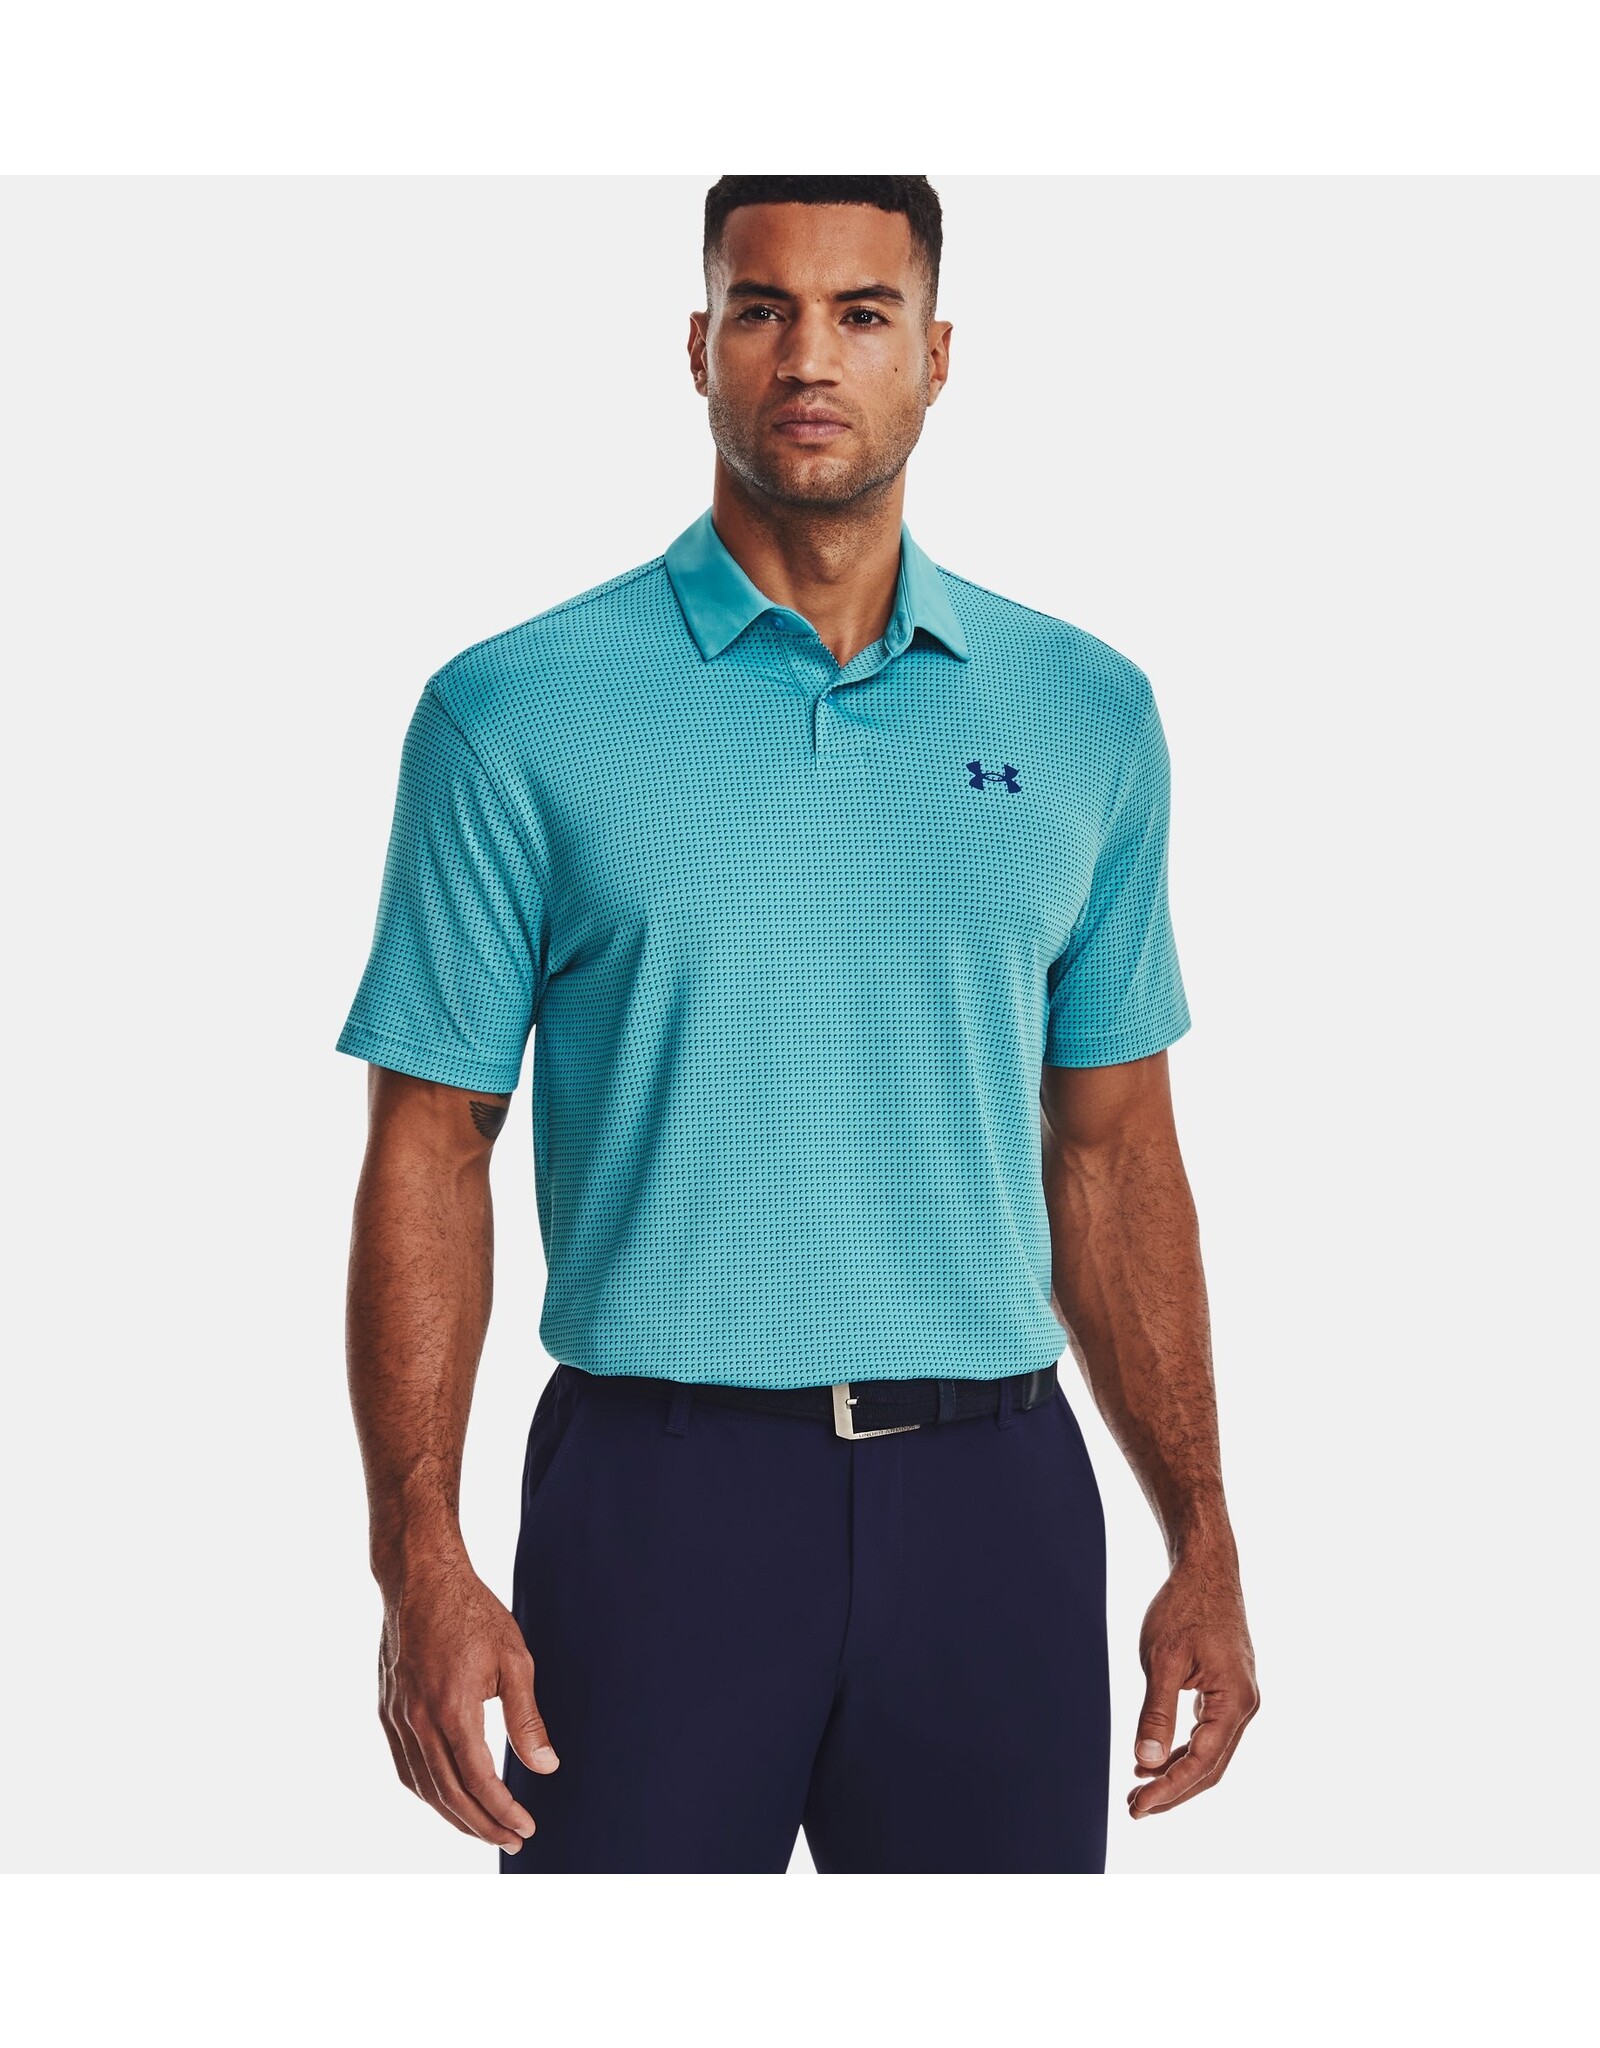 Under Armour Under Armour Mens Tee To Green Printed Polo